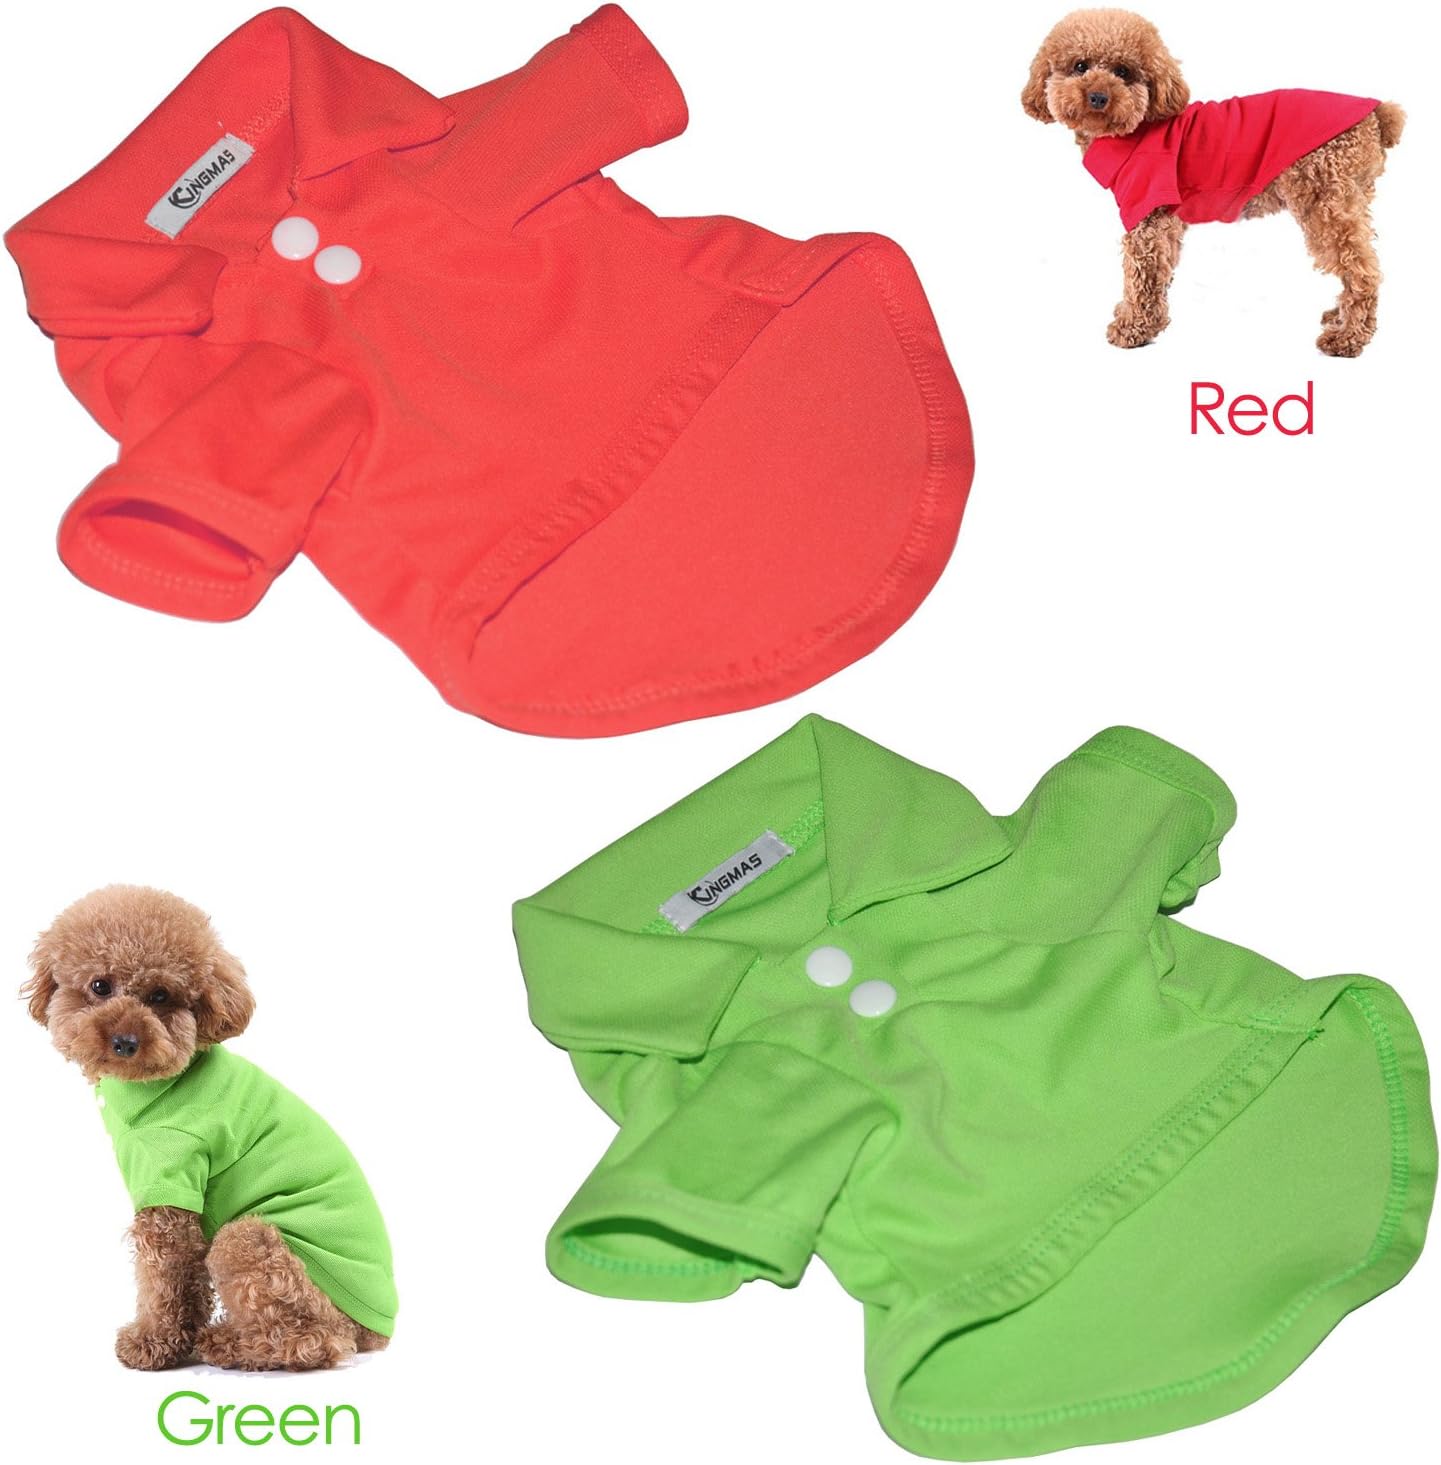 KINGMAS 4 Pieces Dog T-Shirt, Breathable Pet Shirts, Puppy Sweatshirt Dog Clothes Outfit Apparel Coats for Small Medium Dogs Cats (Blue, Green, Red, Orange) - Small